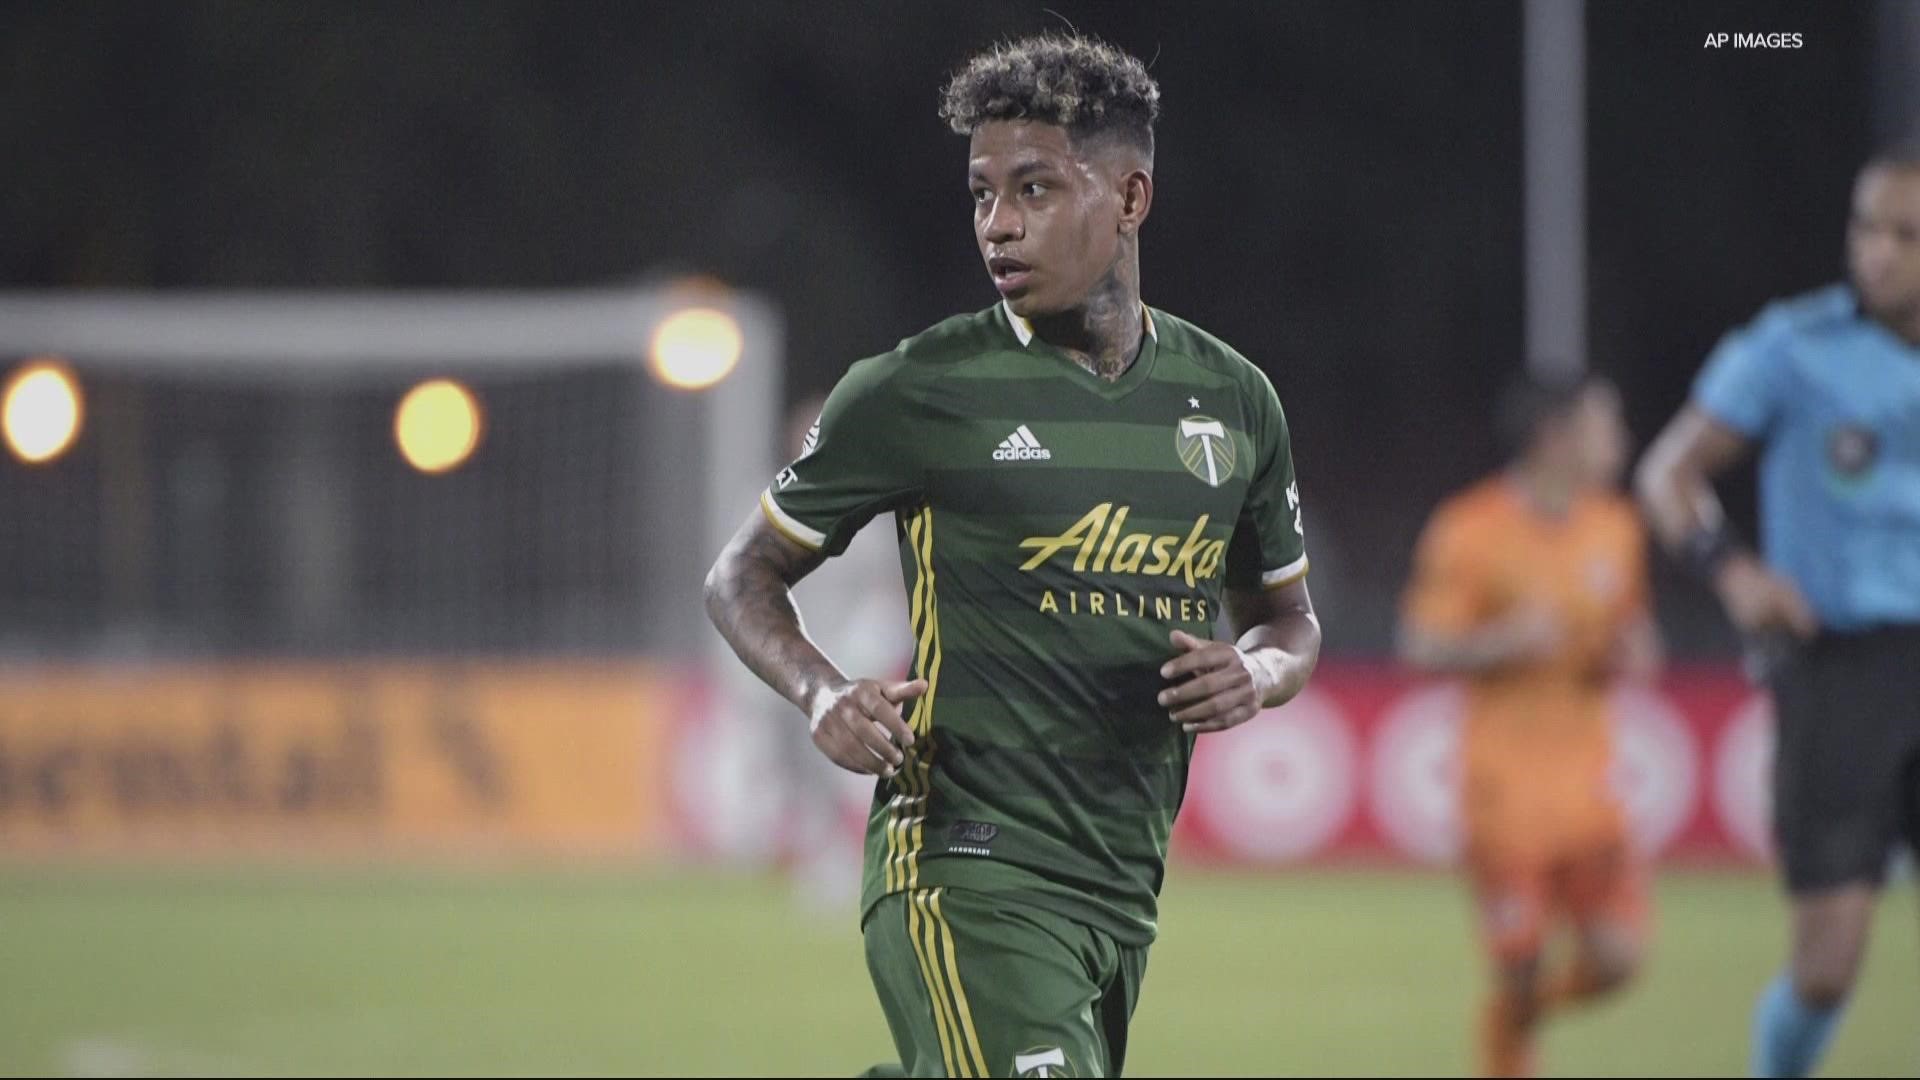 The attorney of Polo's ex-partner Genessis Alarcon said Timbers staff offered support in exchange for not pursuing a criminal case. The Timbers denied the claim.